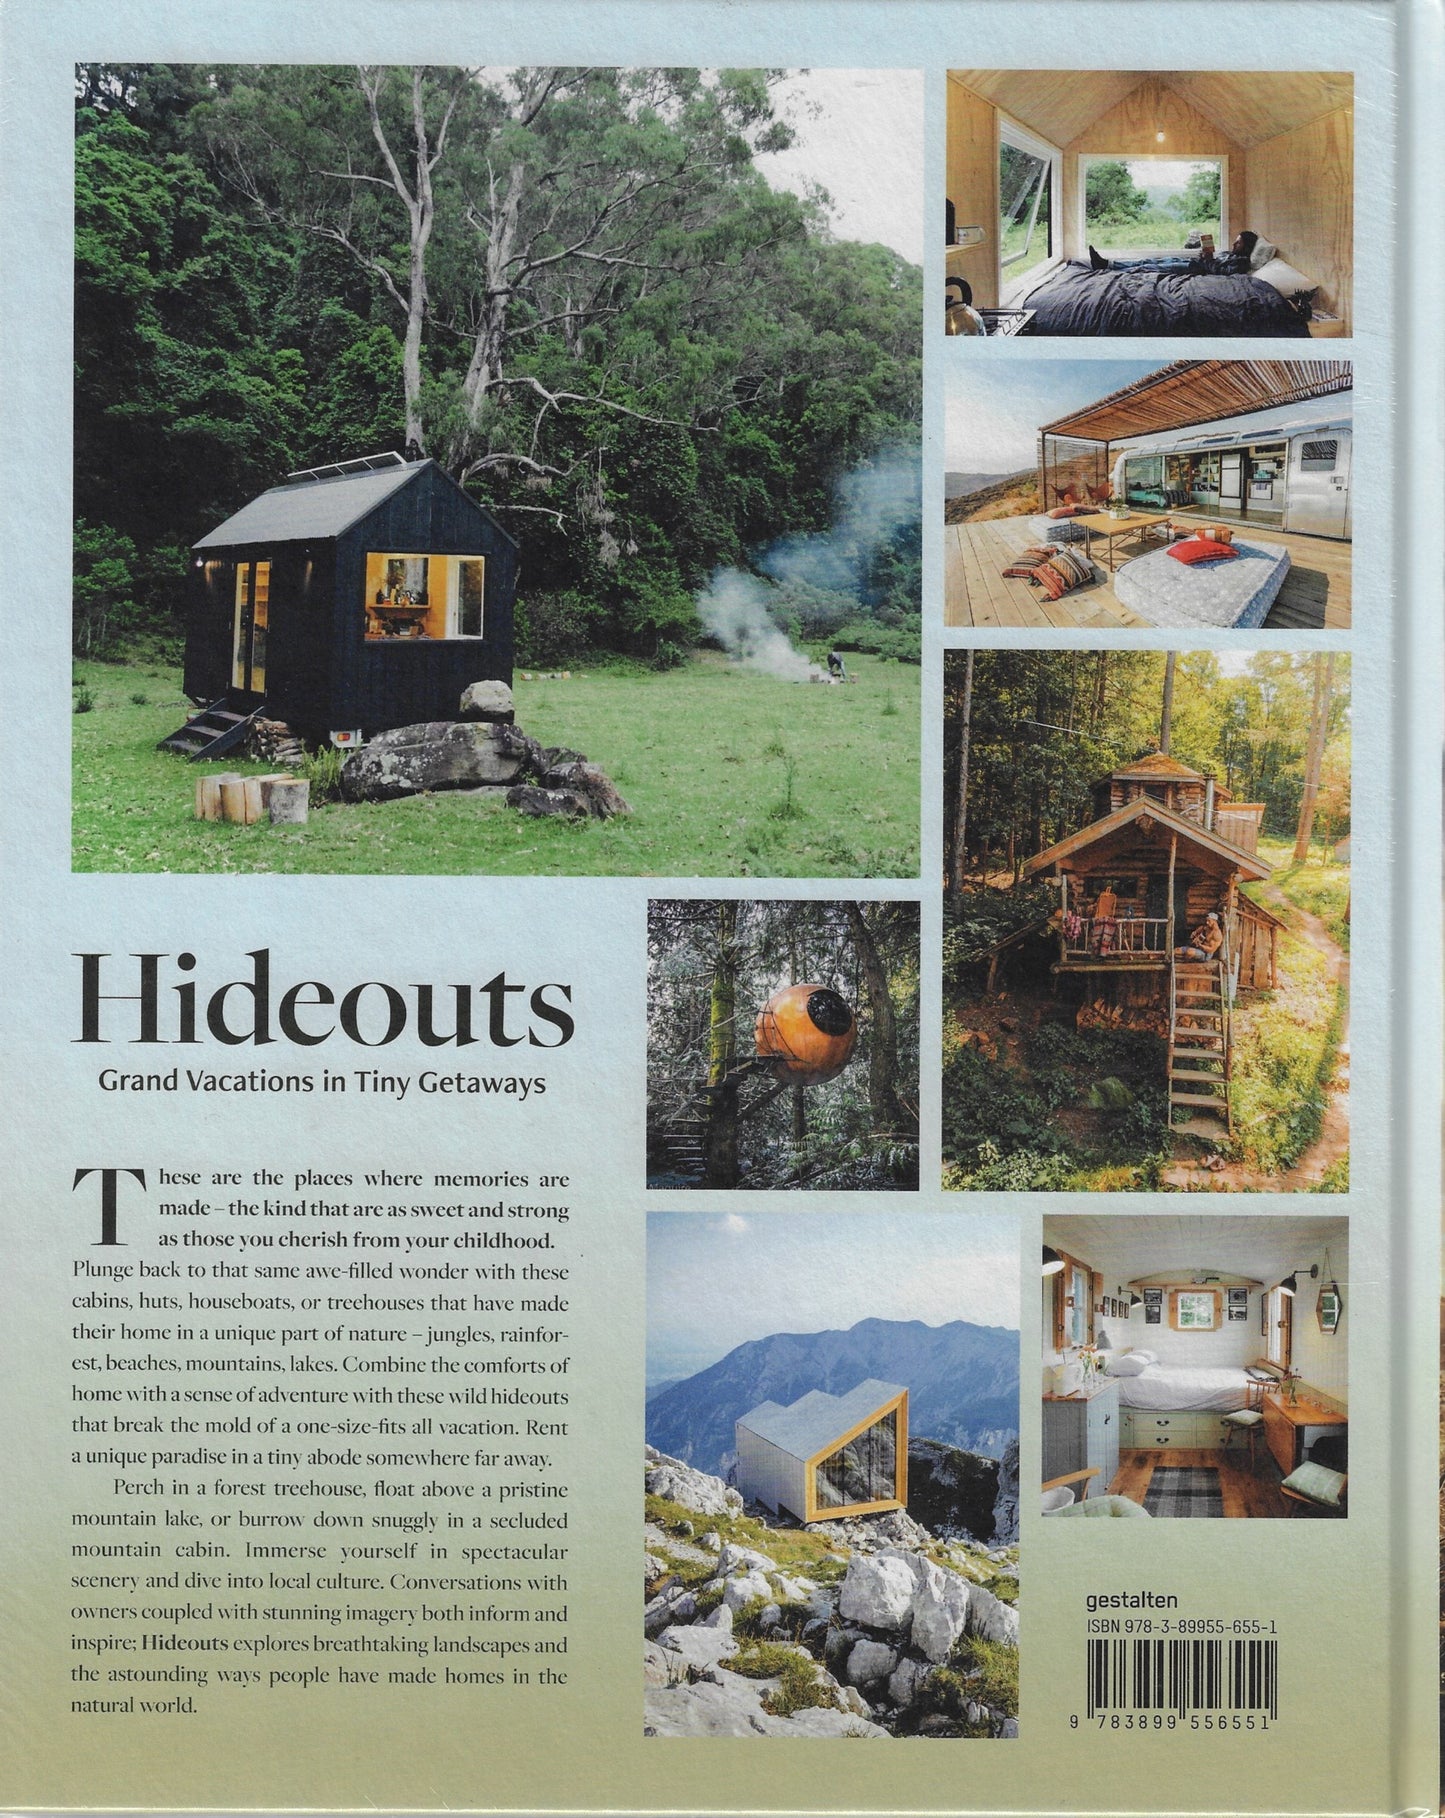 Hideouts / Grand Vacations in Tiny Getaways